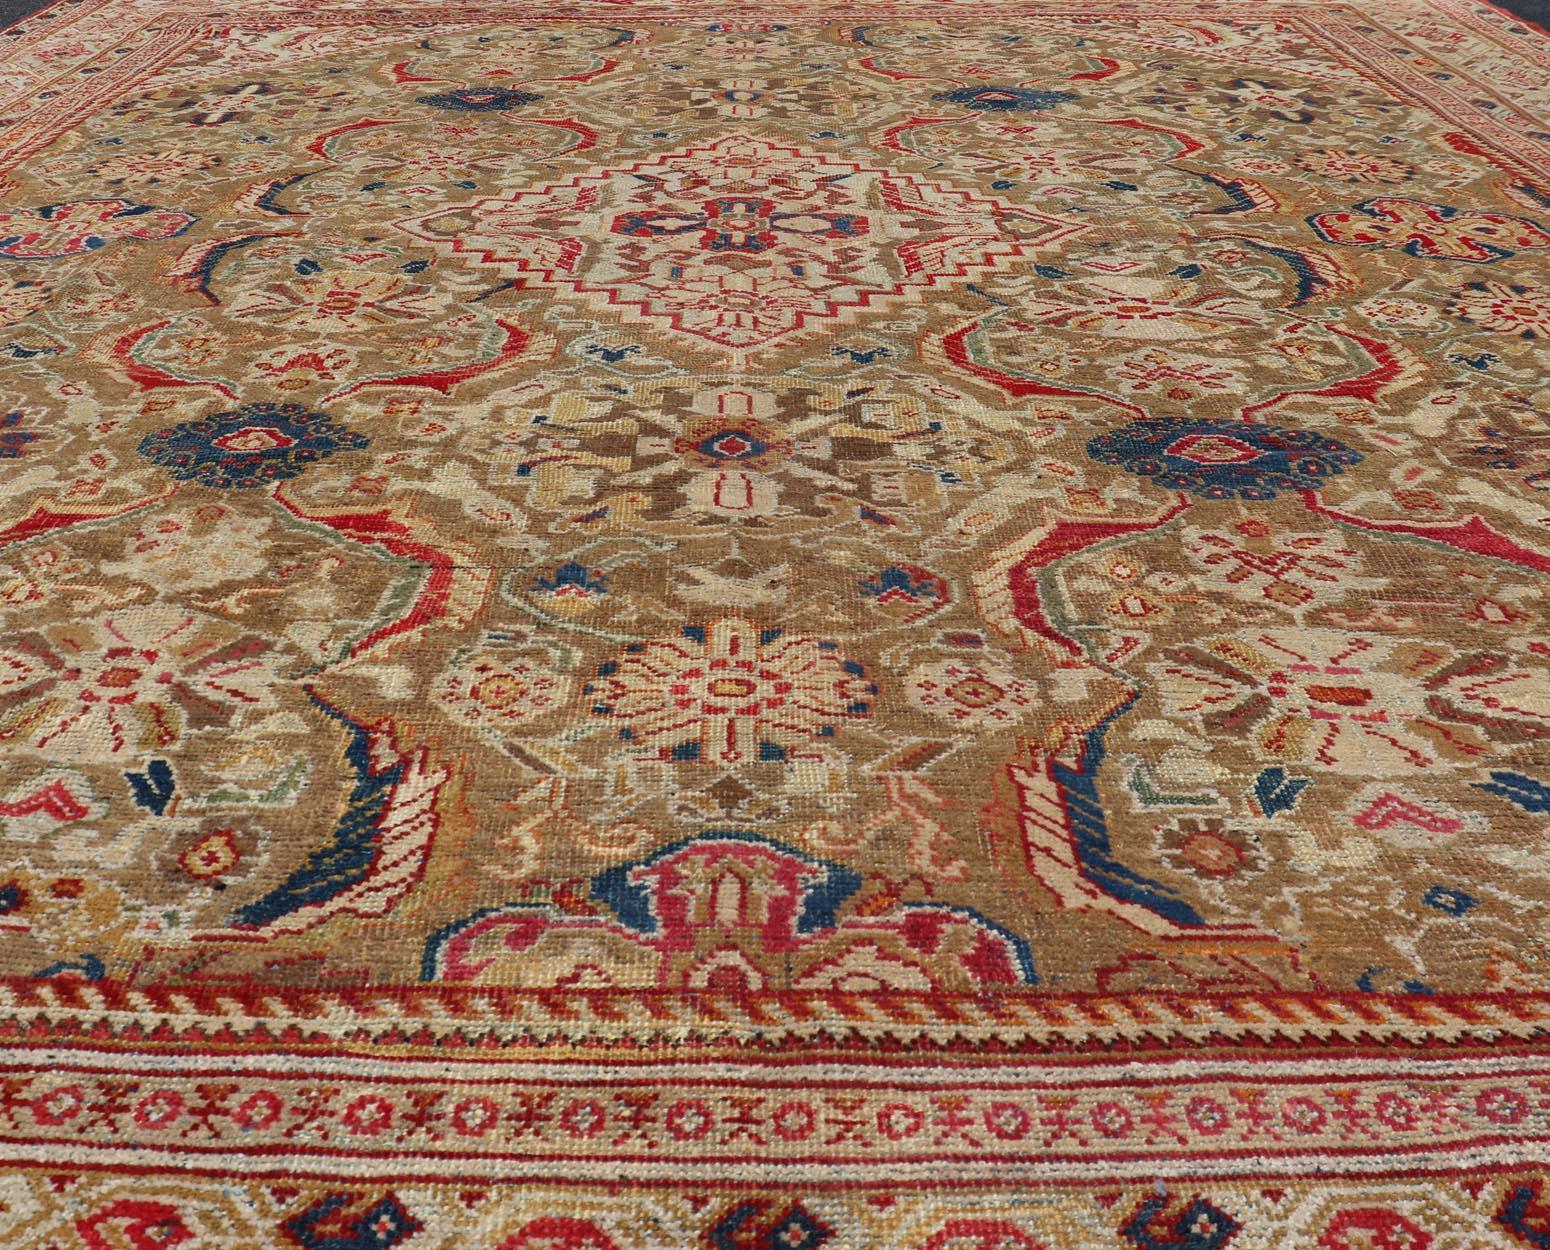 Antique Persian Sultanabad Mahal Carpet with Geometric Design In Green's and Red.  Keivan Woven Arts / Rug / F-0404 country of origin / type: Iran / Sultanabad, circa 1910

Measures: 10'8 x 13'4

This antique Persian Sultanabad-Mahal rug features a